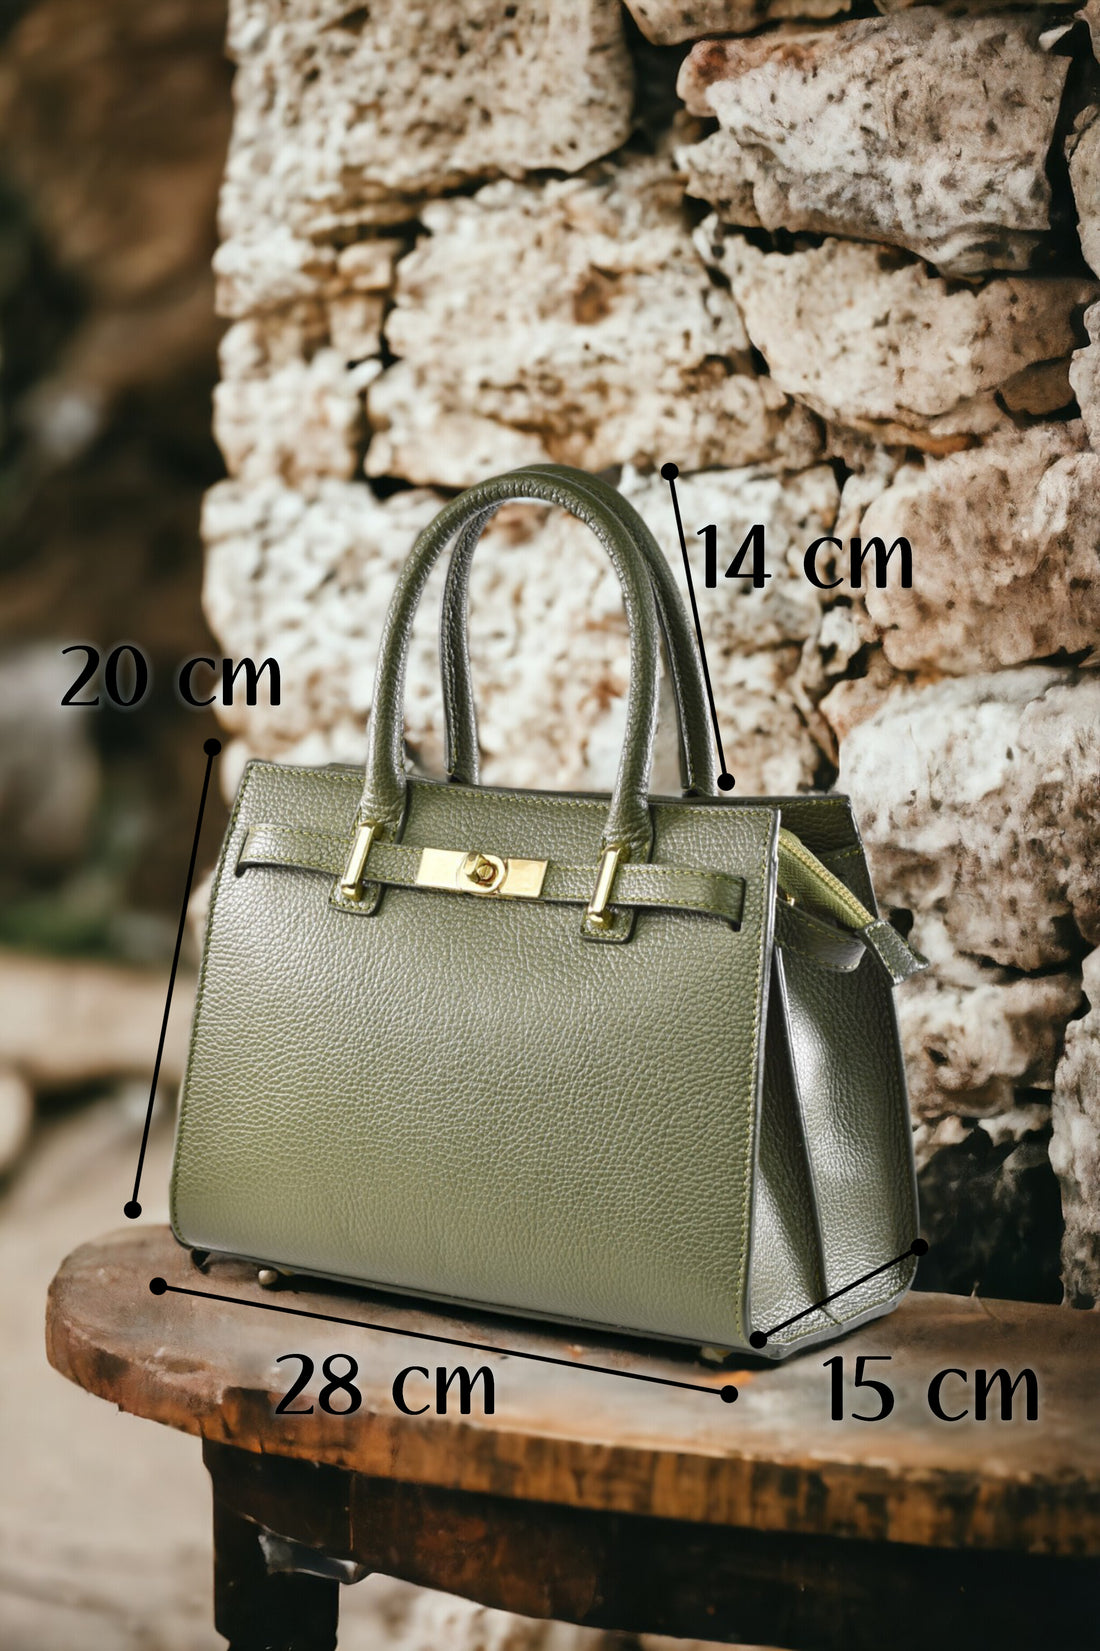 Grace bag in Olive Green Dollar leather